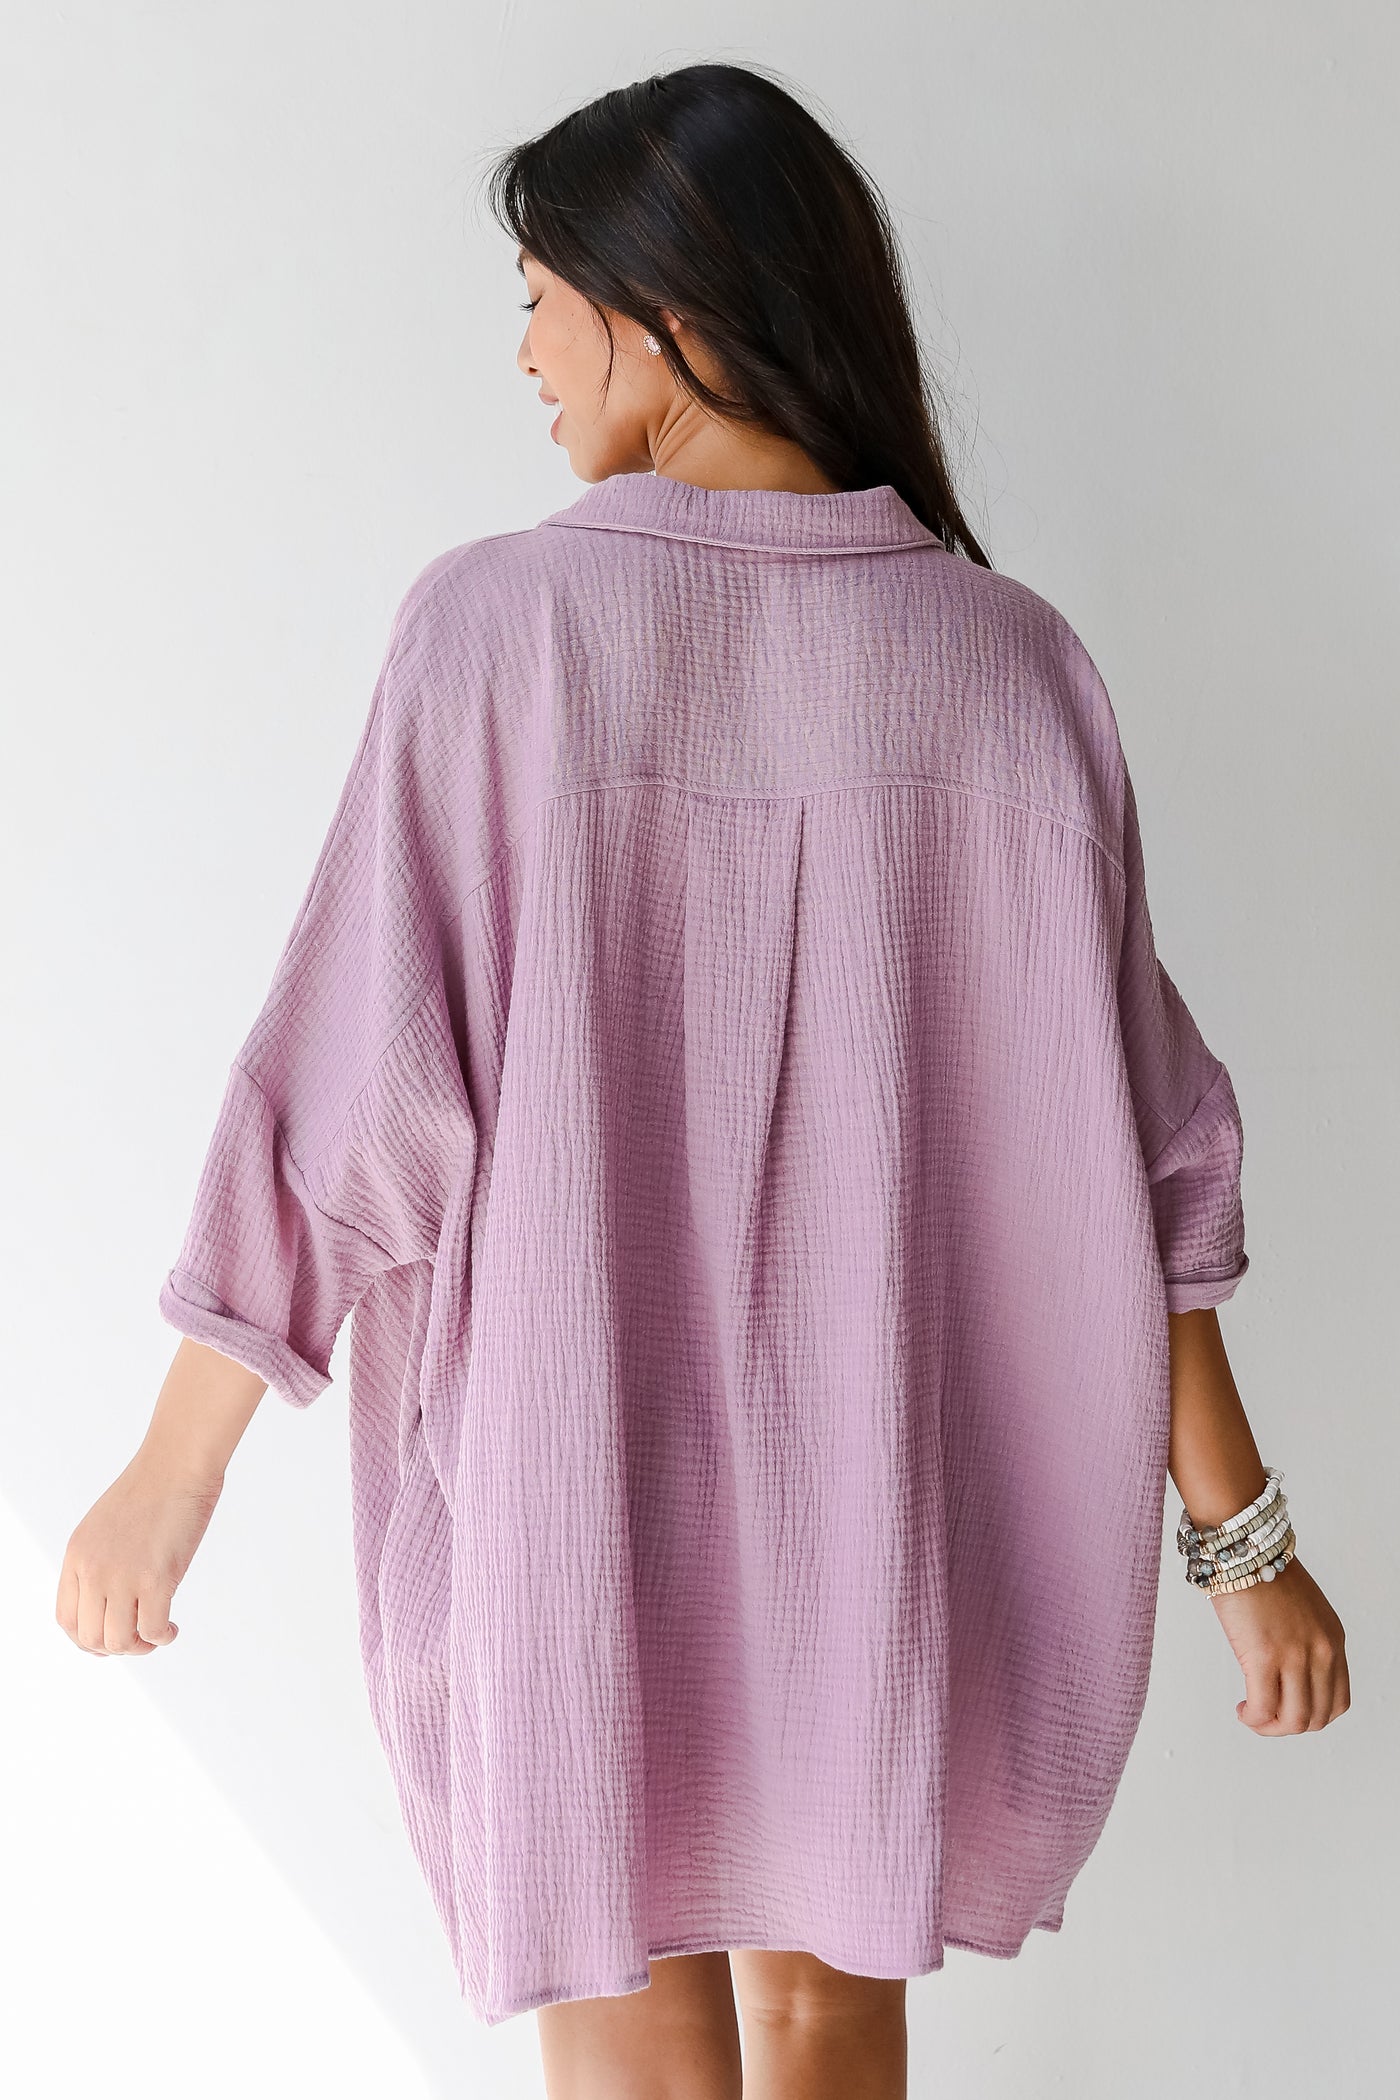 Linen Tunic in lavender back view